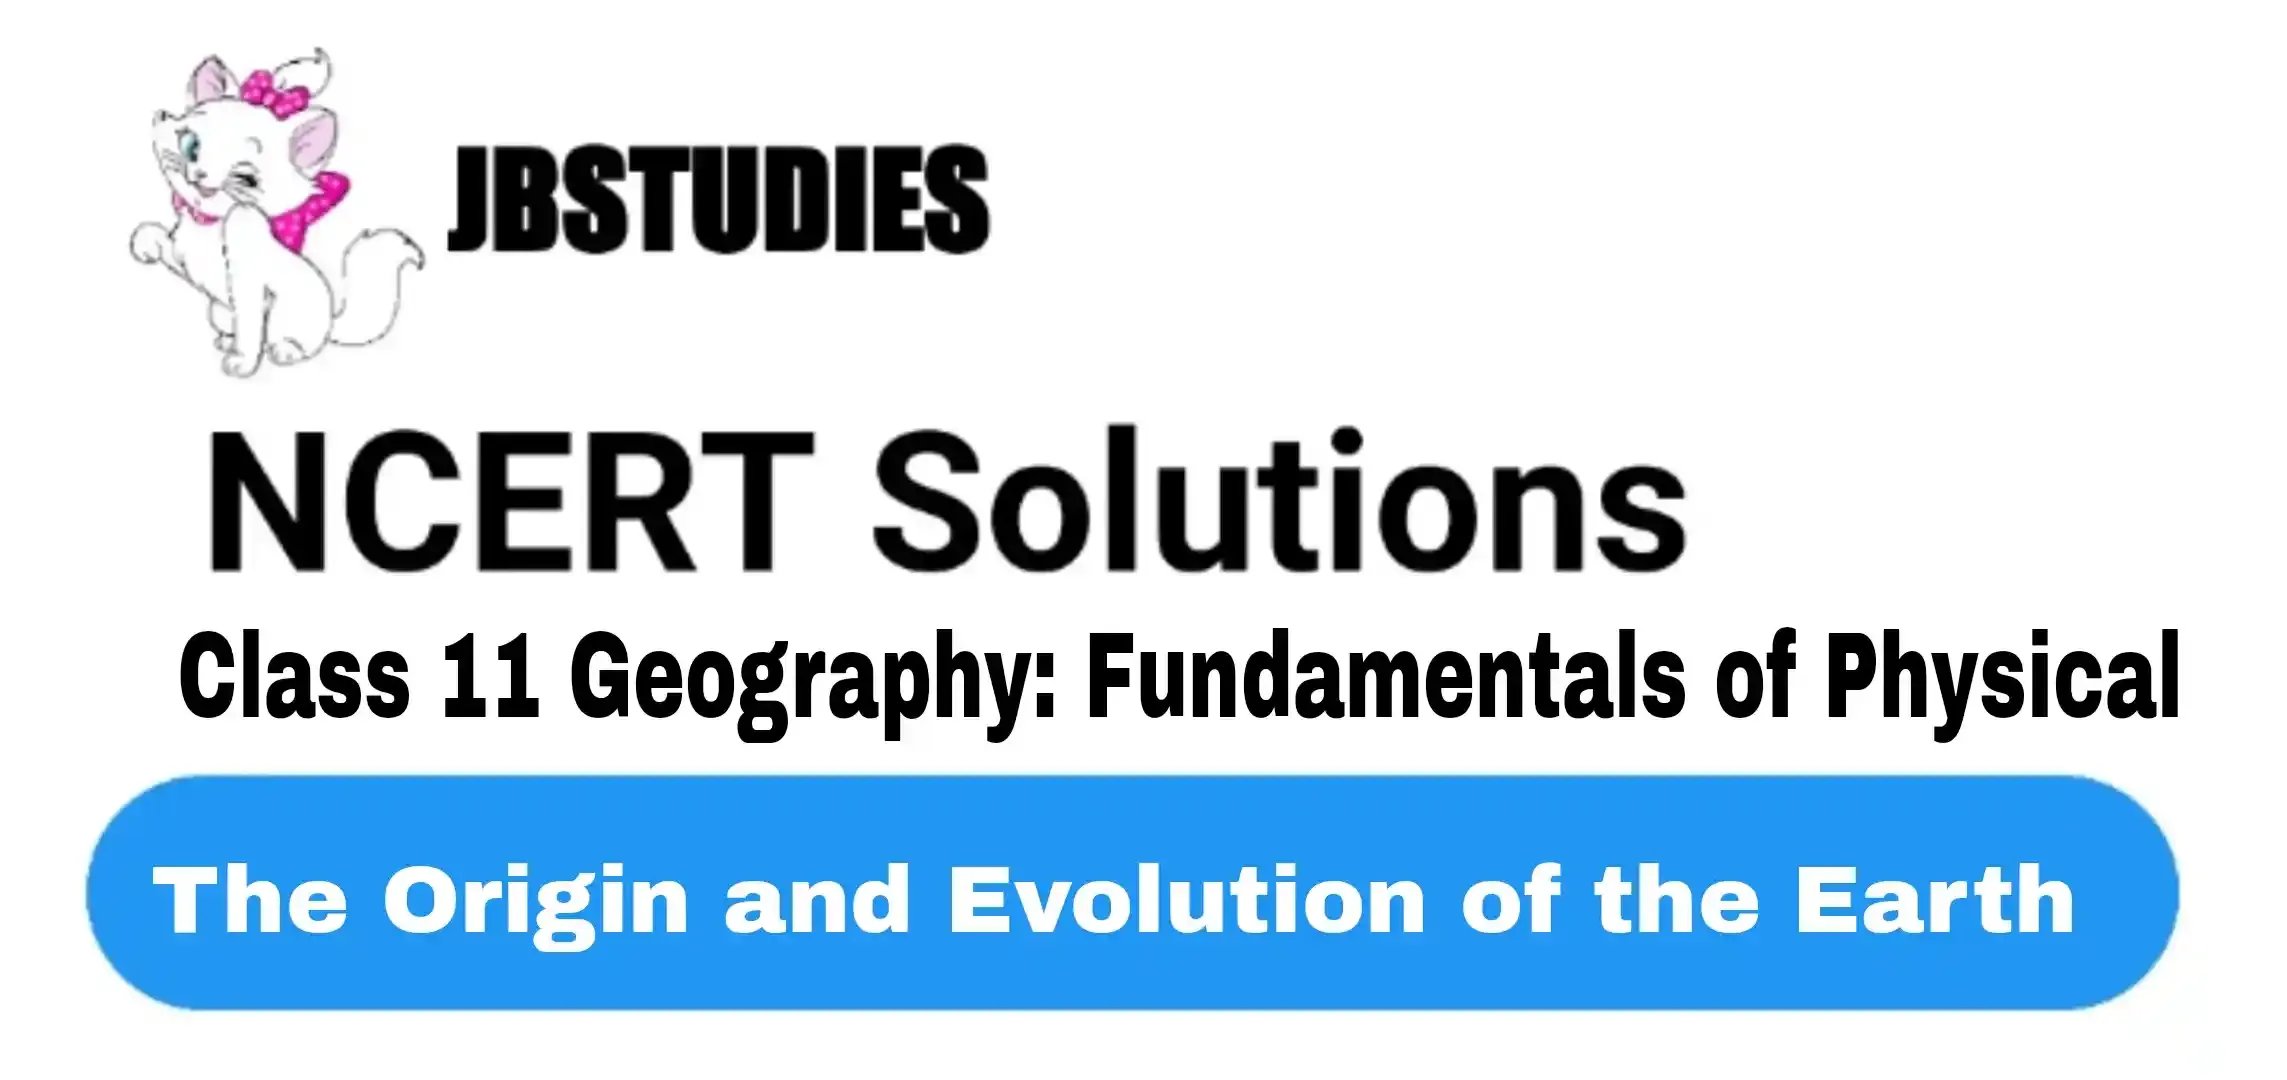 Solutions Class 11 Geography Chapter-2 The Origin and Evolution of the Earth